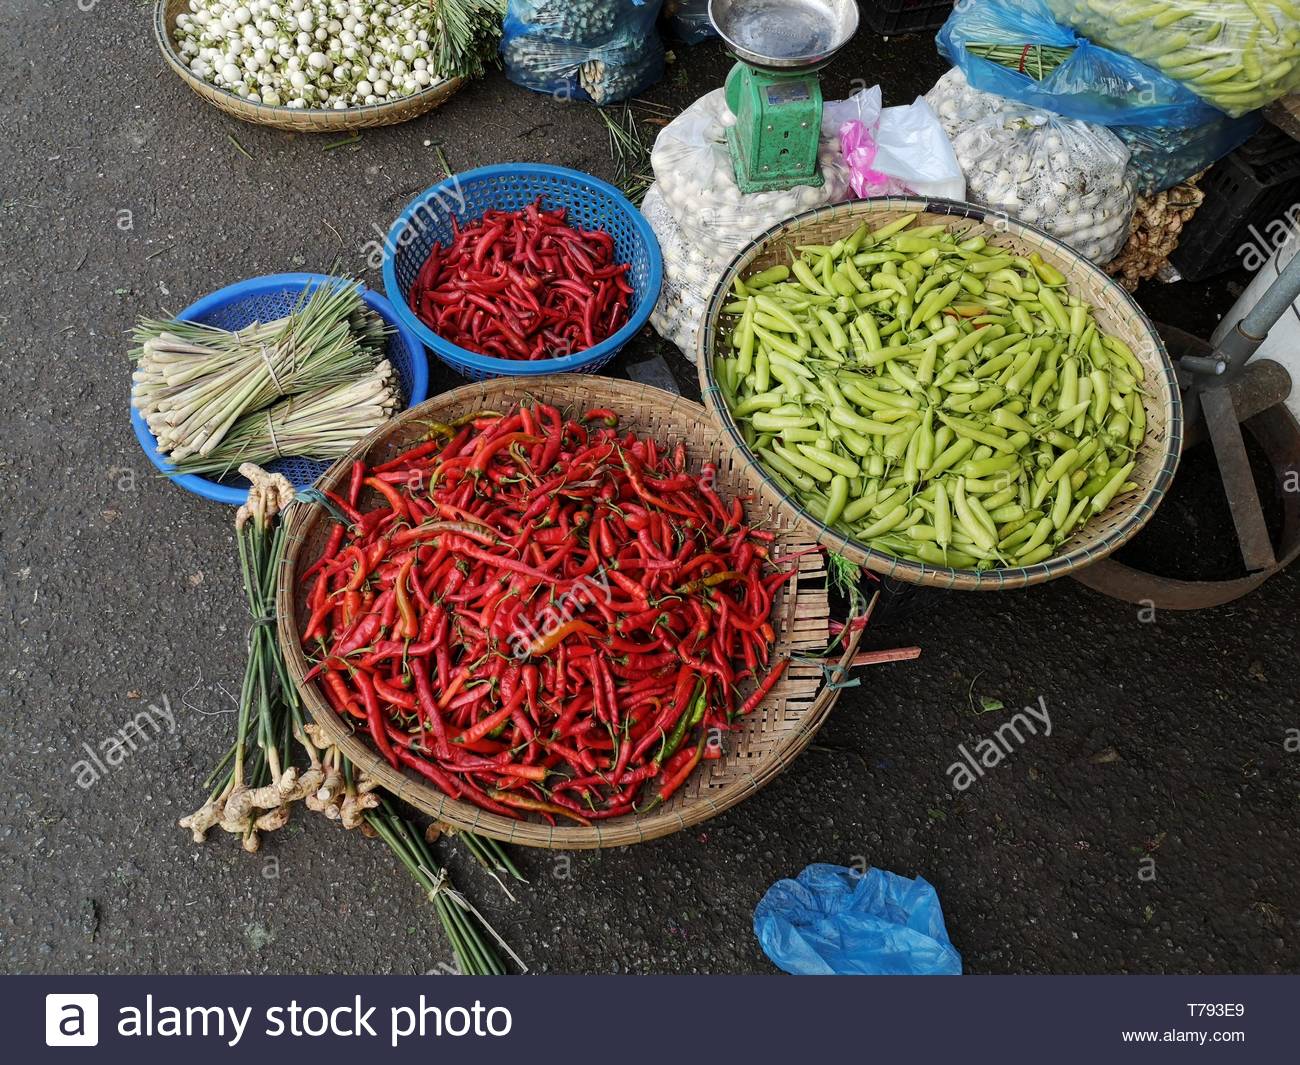 basket-with-pepper-beans-and-other-spices-inside-hue-street-market-vietnam-T793E9.jpg